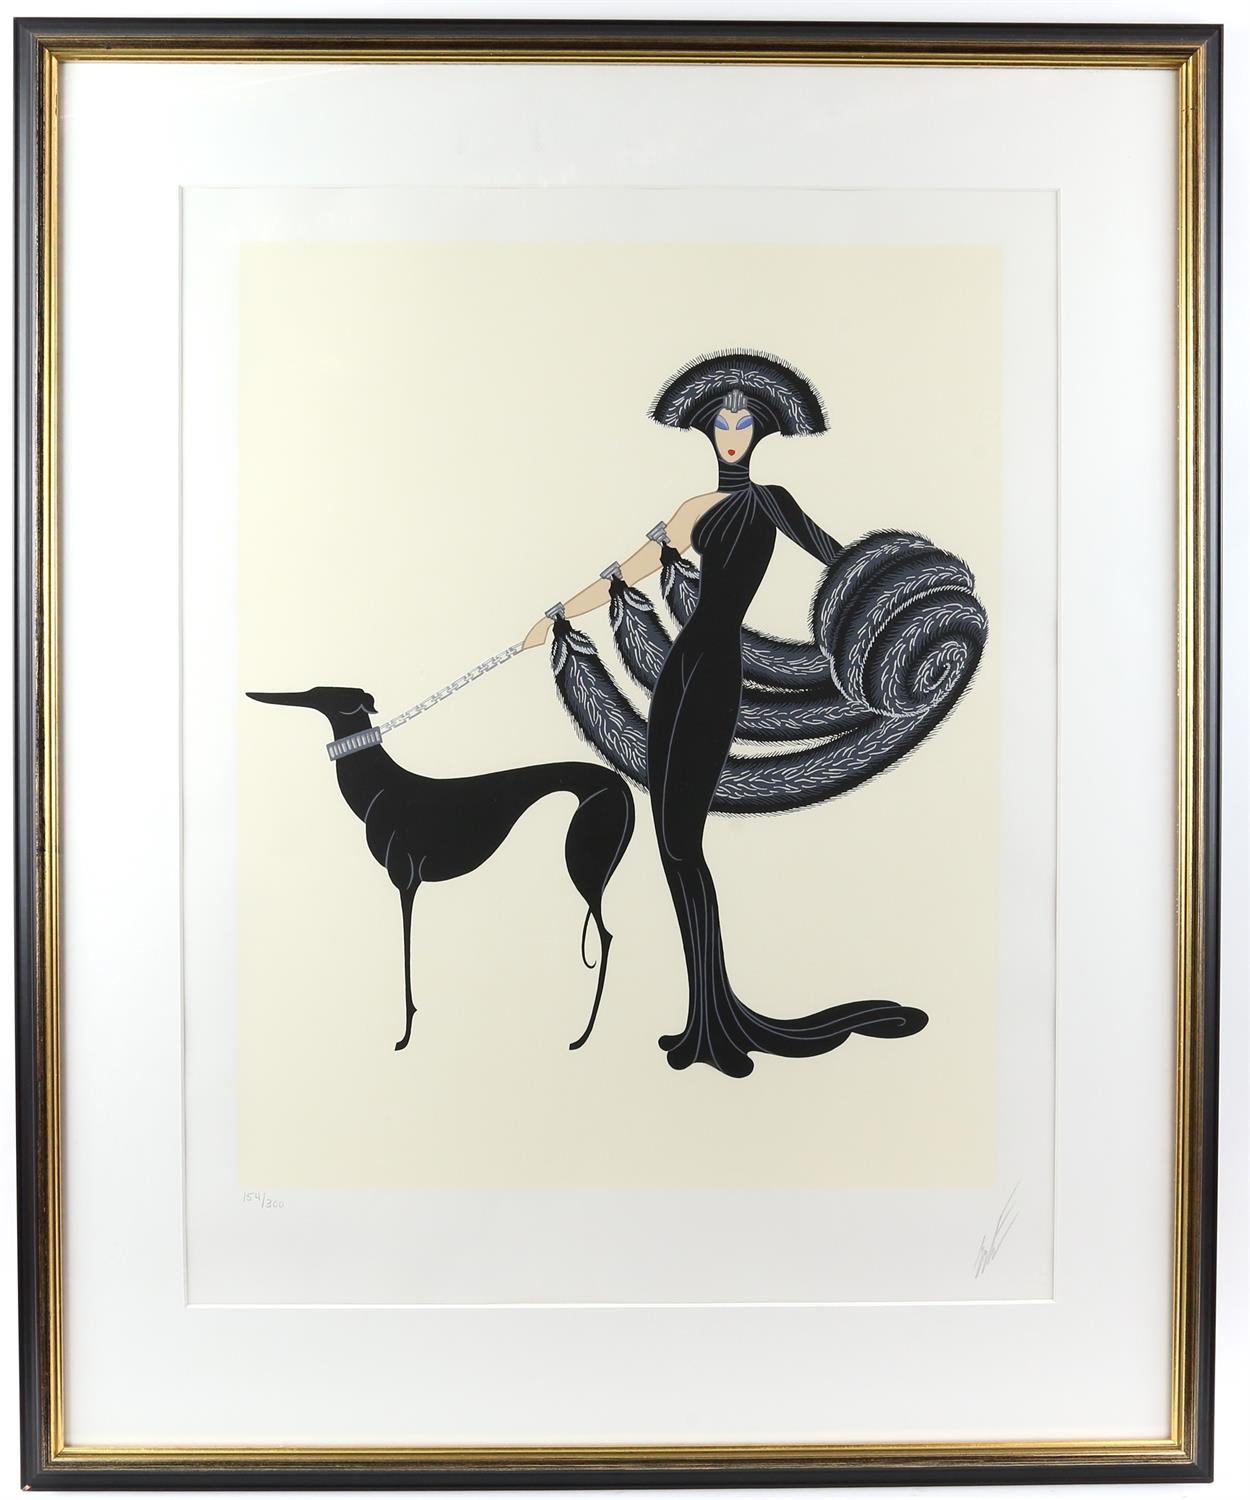 Erte (Russian / French, 1892-1990) (Romain de Tirtoff). 'Symphony in Black', limited edition - Image 2 of 4